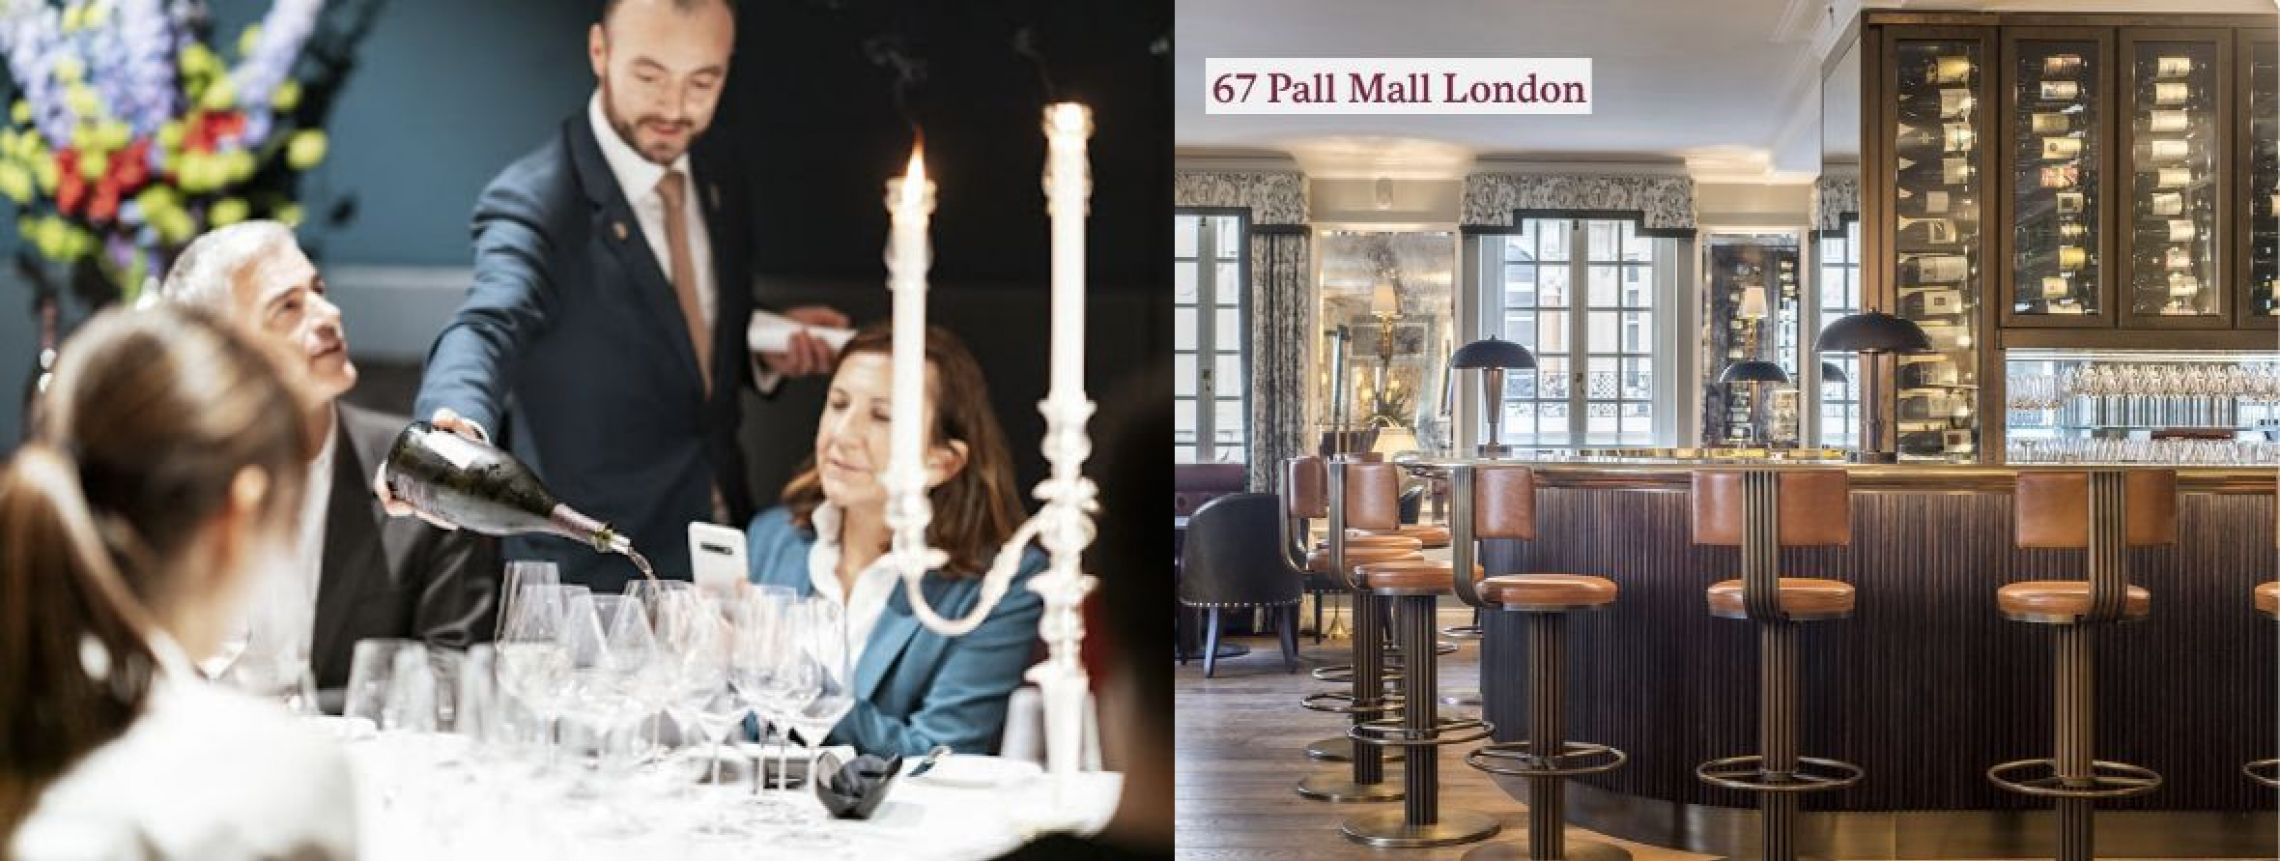 Photo for: Elton Muço from 67 Pall Mall Shares His Stories As A Sommelier